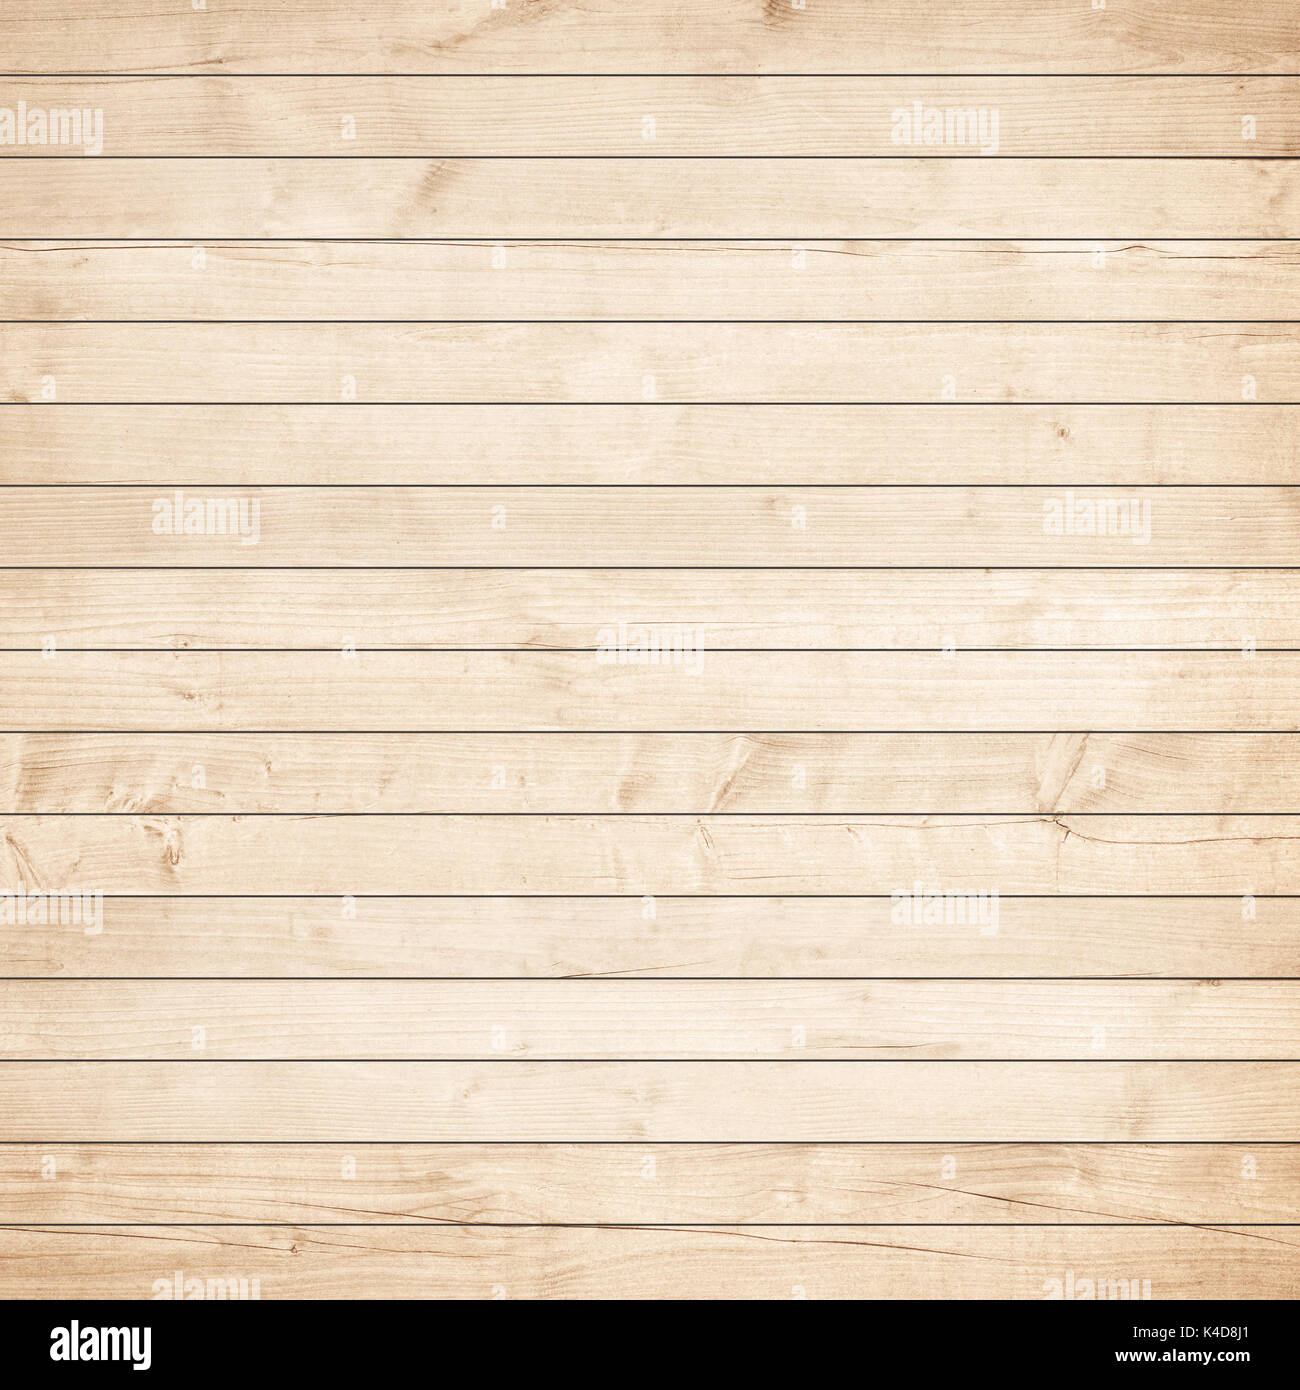 Brown wooden parquet, table, floor or wall surface. Light wood texture. Stock Photo